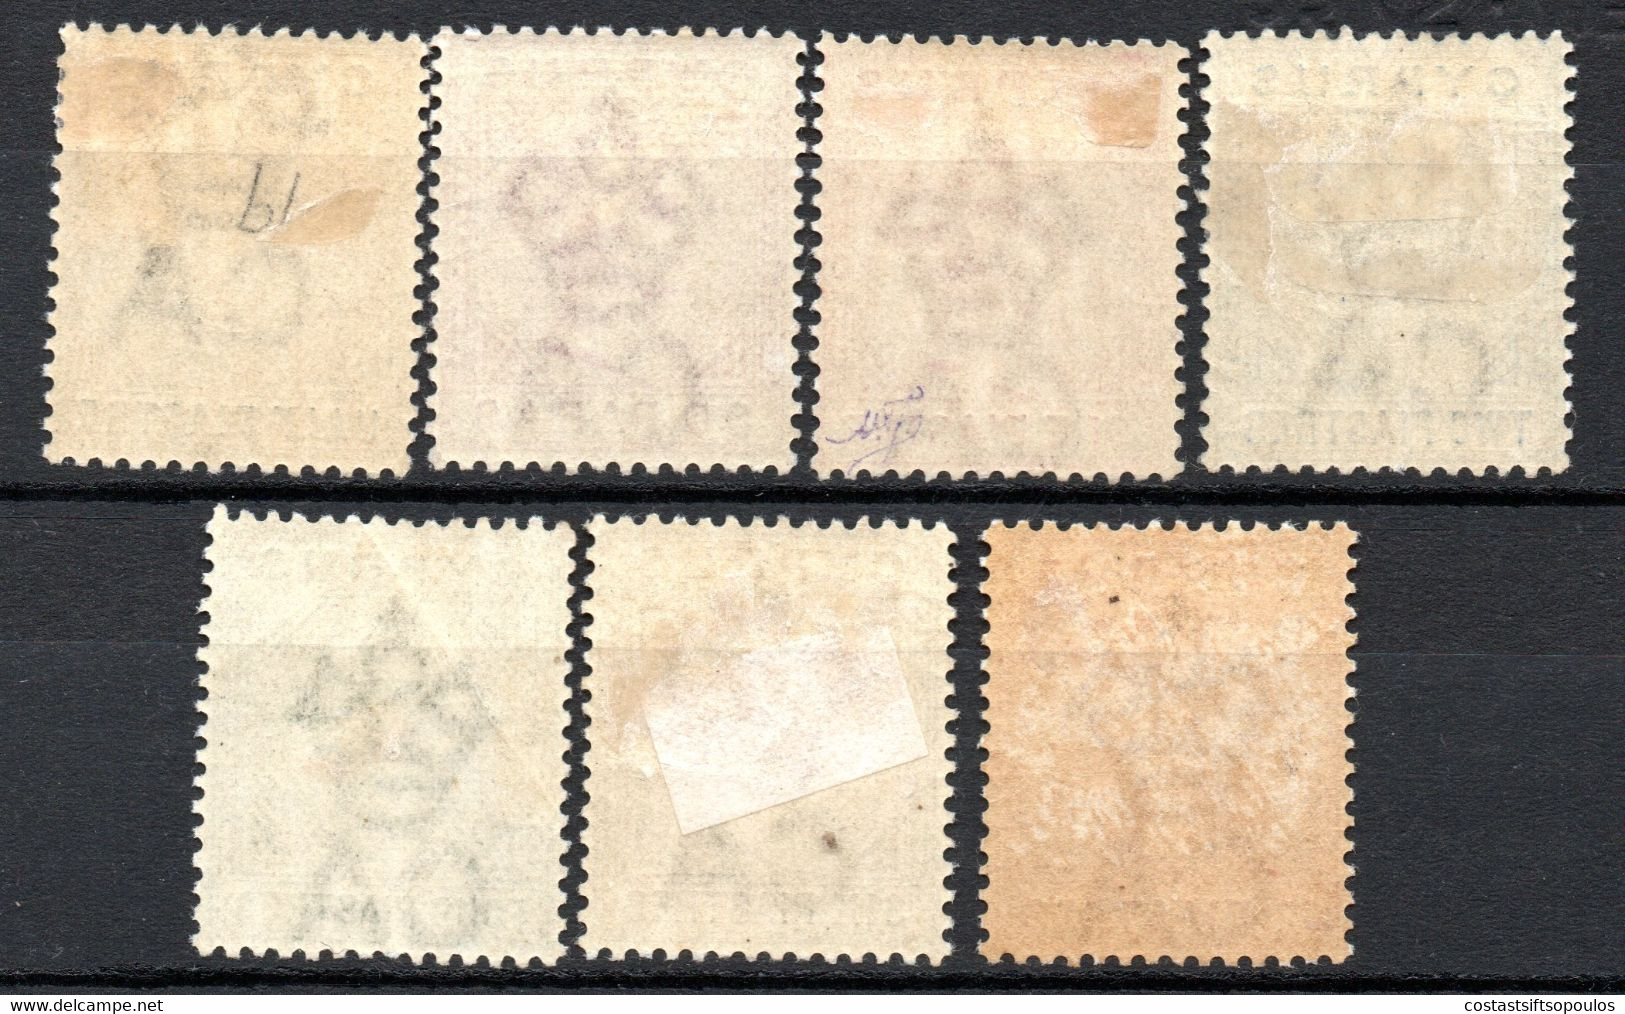 1400. CYPRUS. 1882-1894 VICTORIA 1/2-12P. MIXED DIES. MH. 4P. CREASED. - Cyprus (...-1960)